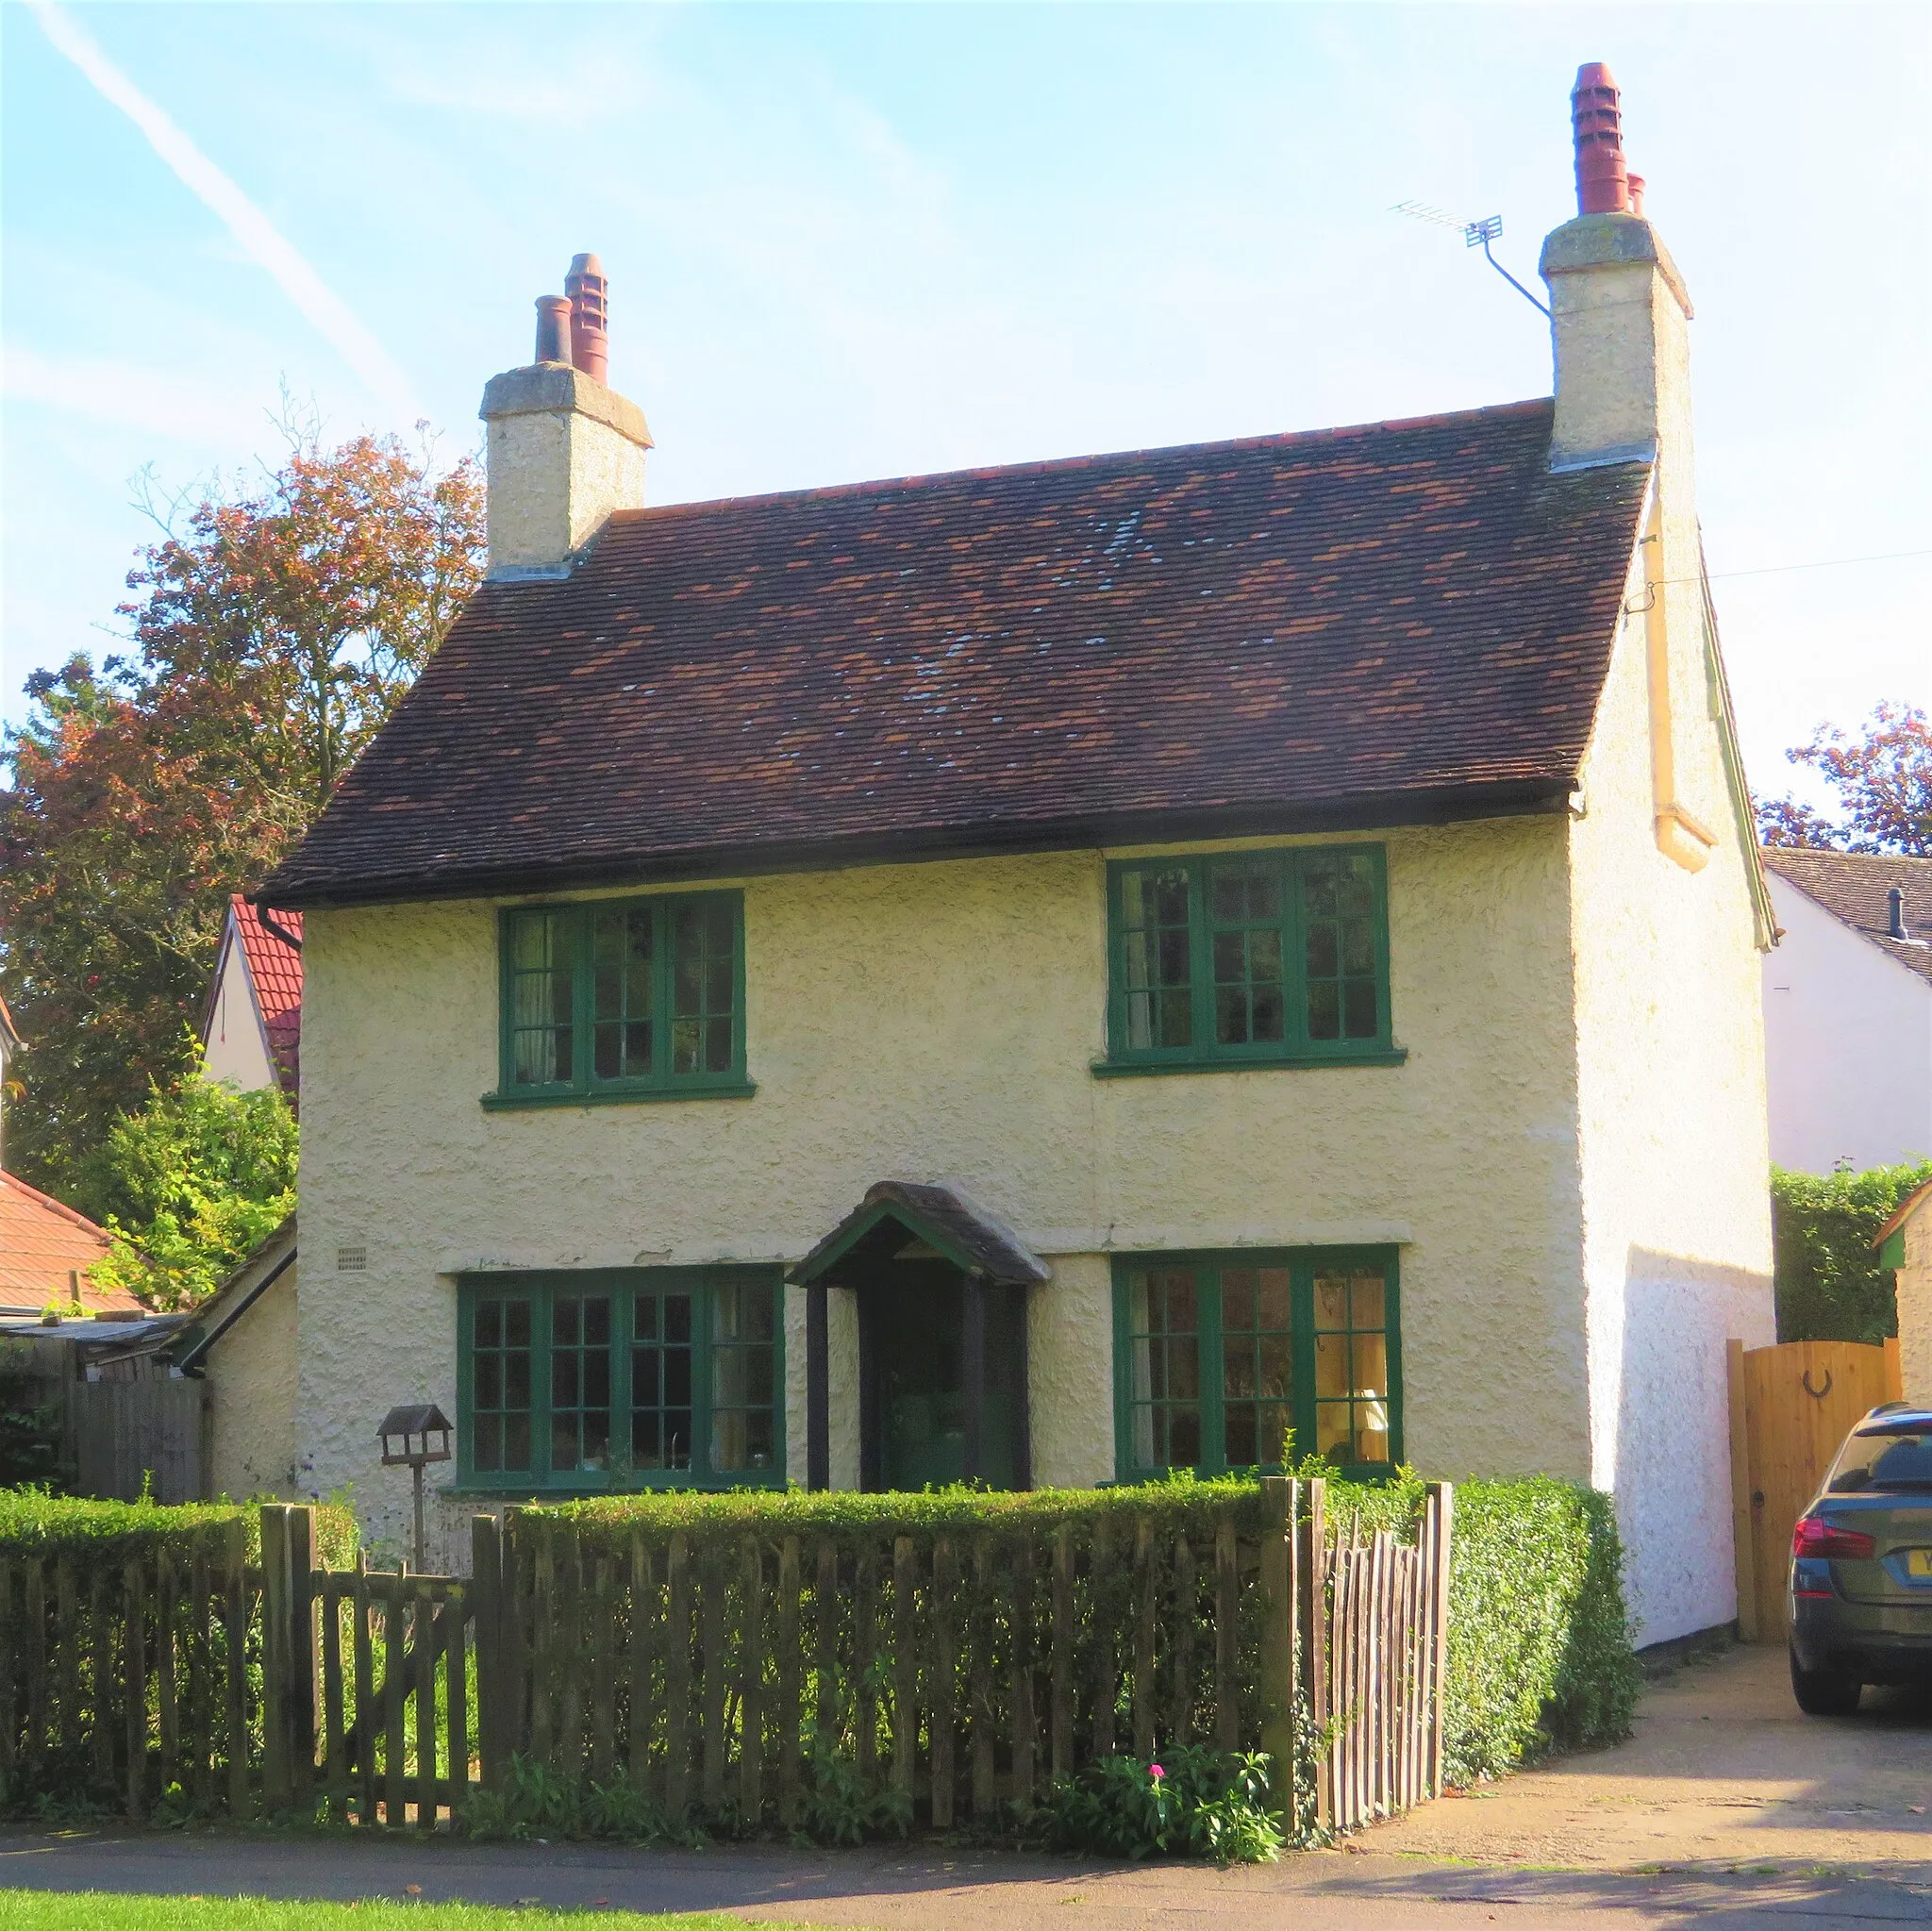 Photo showing: Won best £150 cottage, architect Percy Houfton. Grade II listed building.